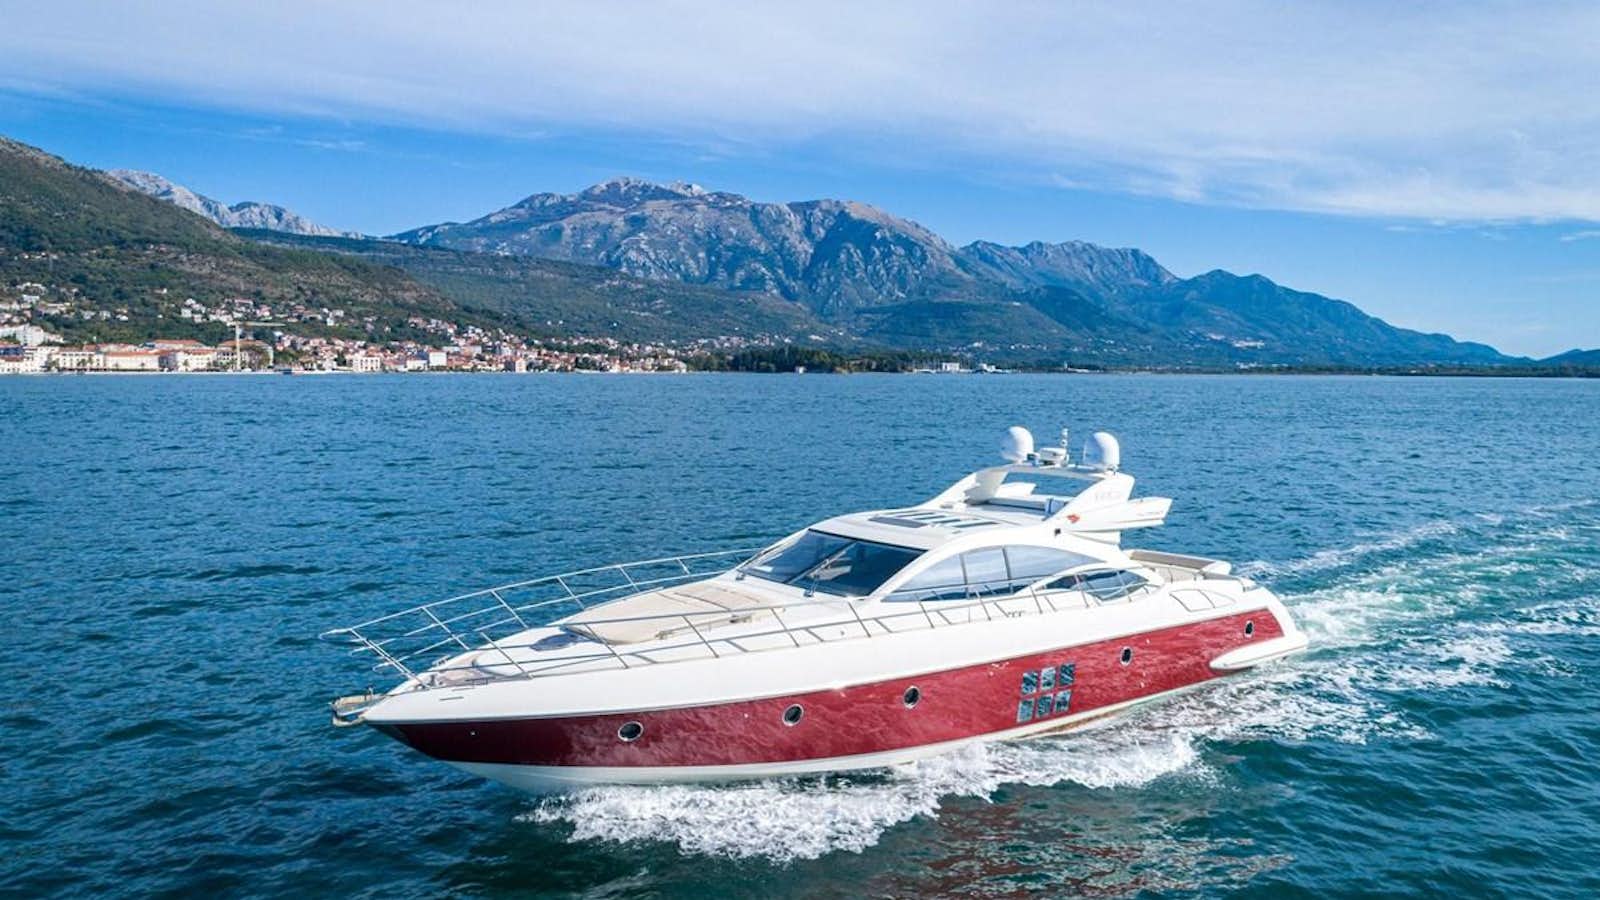 Blind squirrel
Yacht for Sale